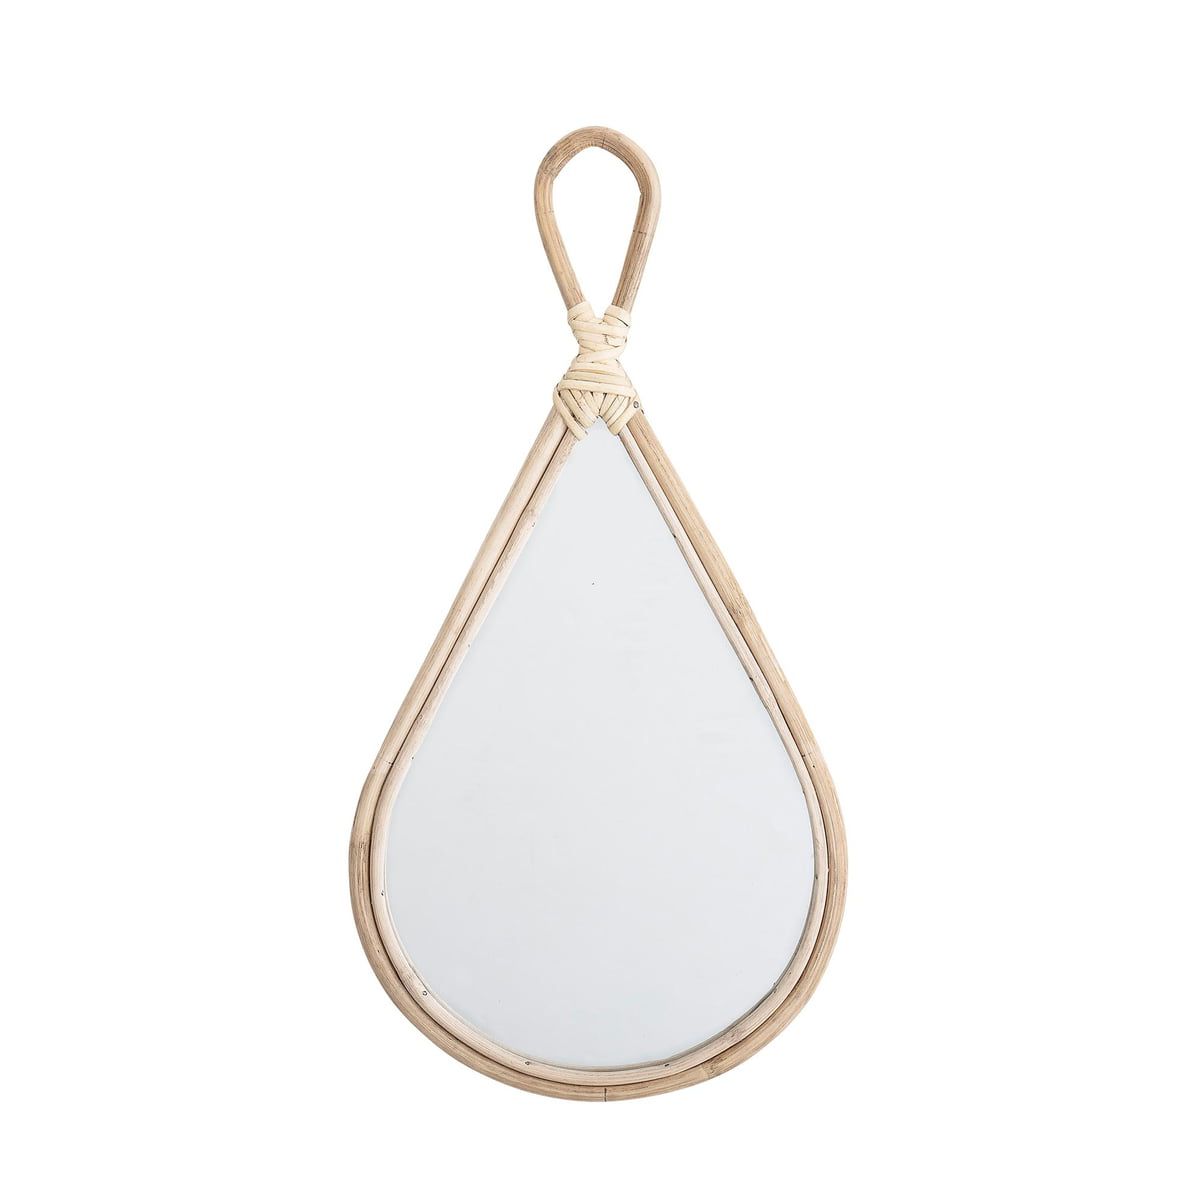 Bloomingville – Wall Mirror With Bamboo Frame, 55 X 28 Cm Intended For Recent Bamboo Framed Wall Mirrors (View 20 of 20)